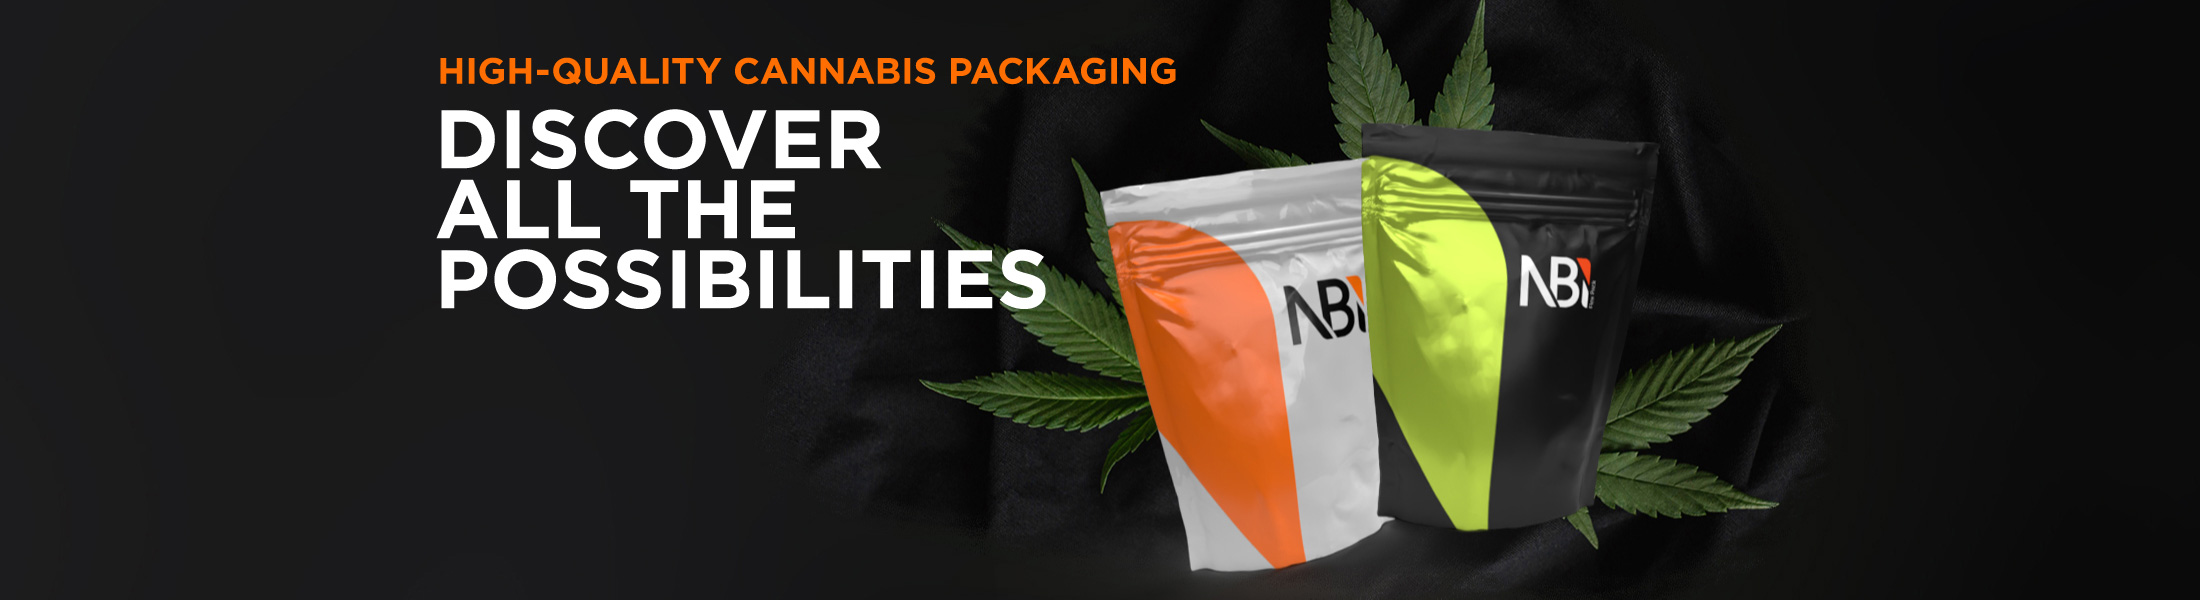 High-quality cannabis packaging - discover all the possibilities!